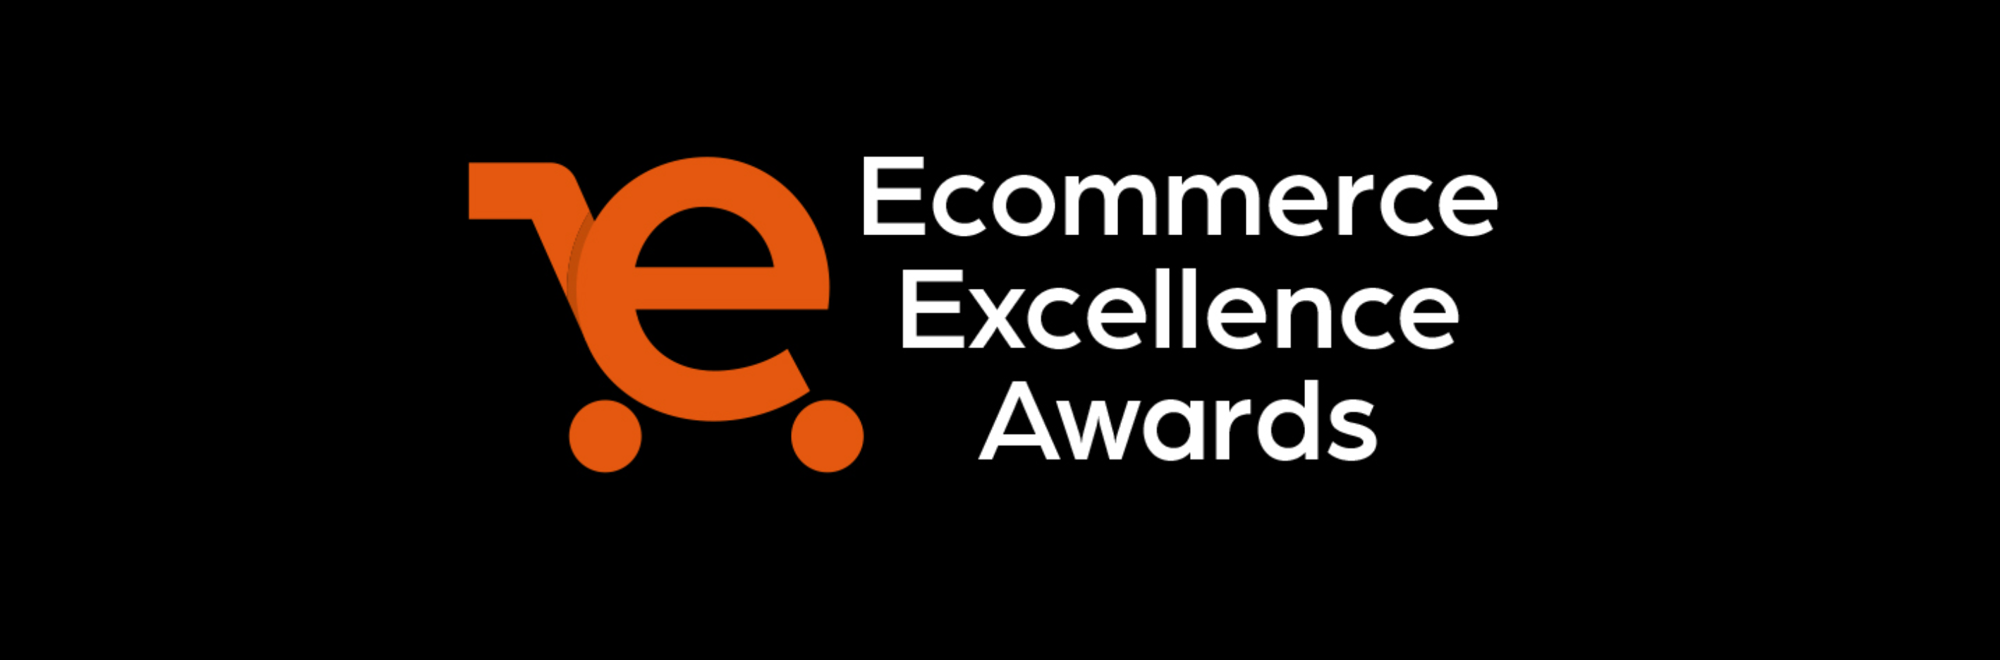 ECommerce Age, PRmoment and Creative Moment launch The Ecommerce Excellence Awards